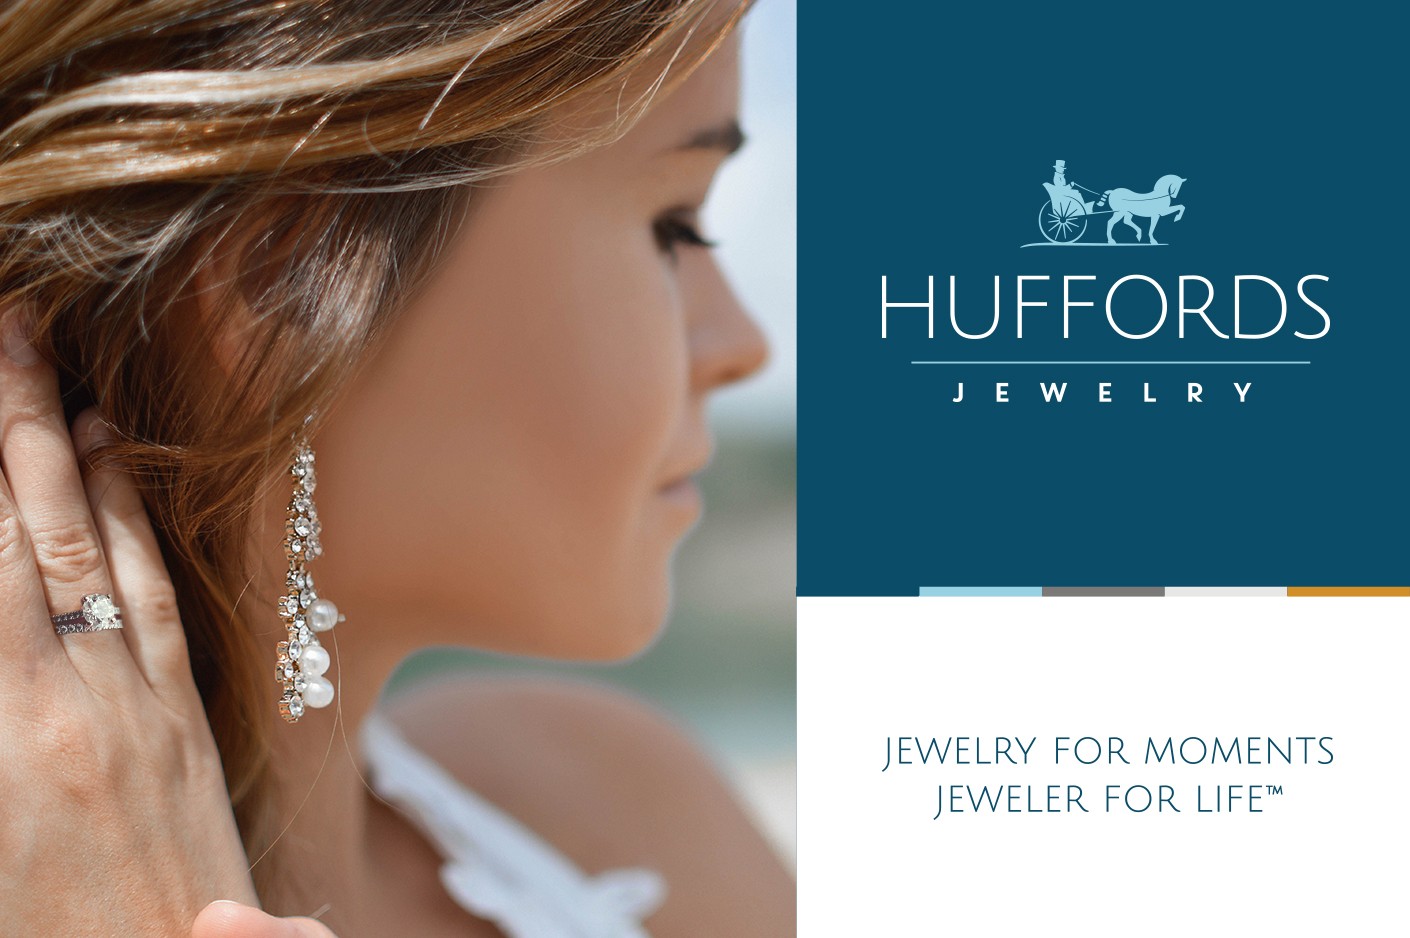 Referencing the company's rich history, our new logo design for Huffords Jewelry features the iconic horse and driver that had been a part of the brand mark for 30 years.